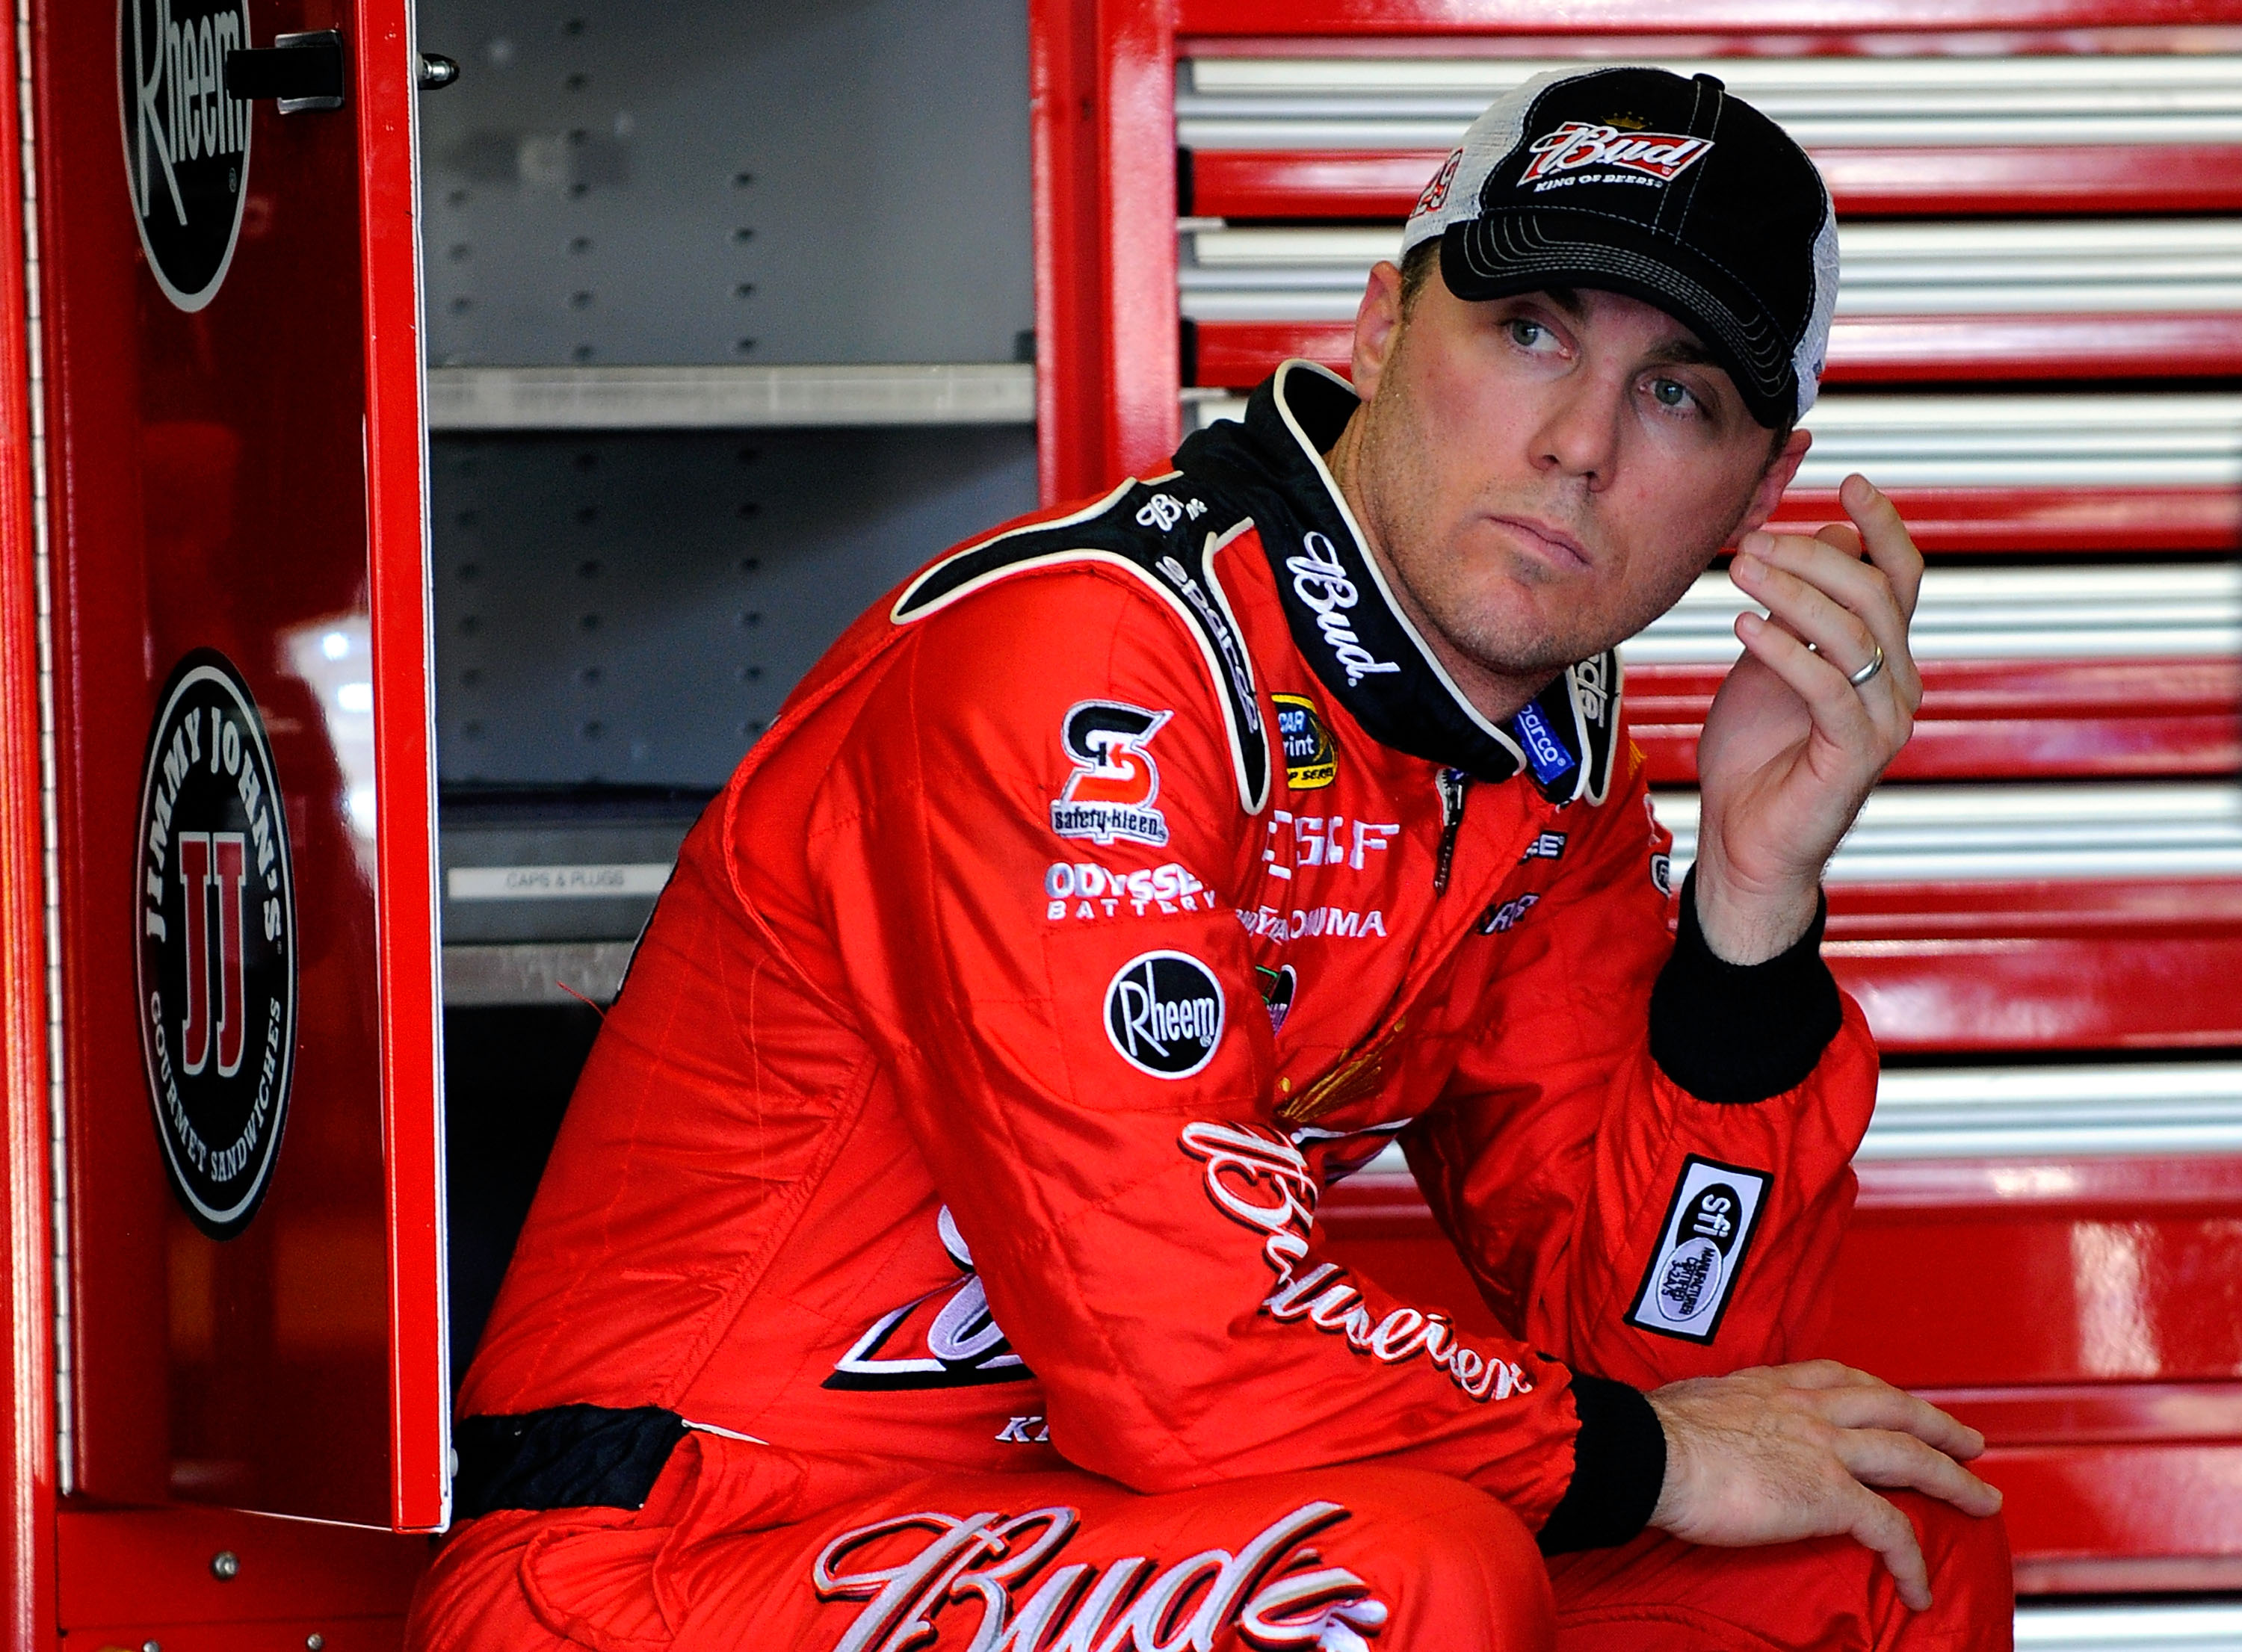 FORT WORTH, TX - APRIL 08:  Kevin Harvick, driver of the #29 Budweiser Chevrolet, sits in the garage during practice for the NASCAR Sprint Cup Series Samsung Mobile 500 at Texas Motor Speedway on April 8, 2011 in Fort Worth, Texas.  (Photo by Jared C. Til